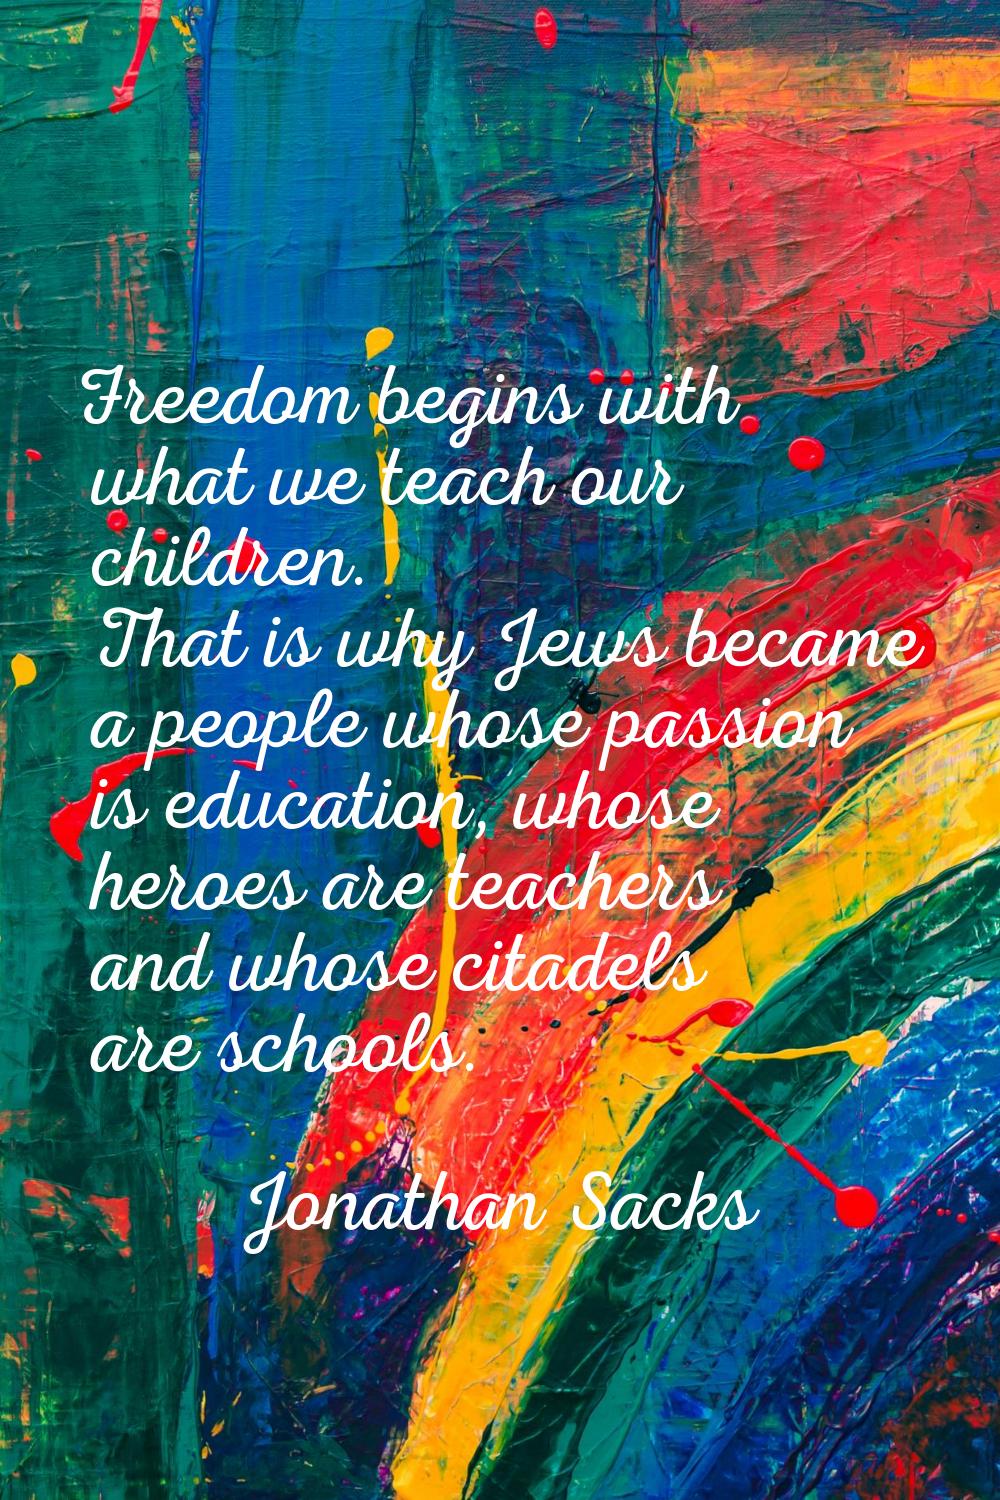 Freedom begins with what we teach our children. That is why Jews became a people whose passion is e